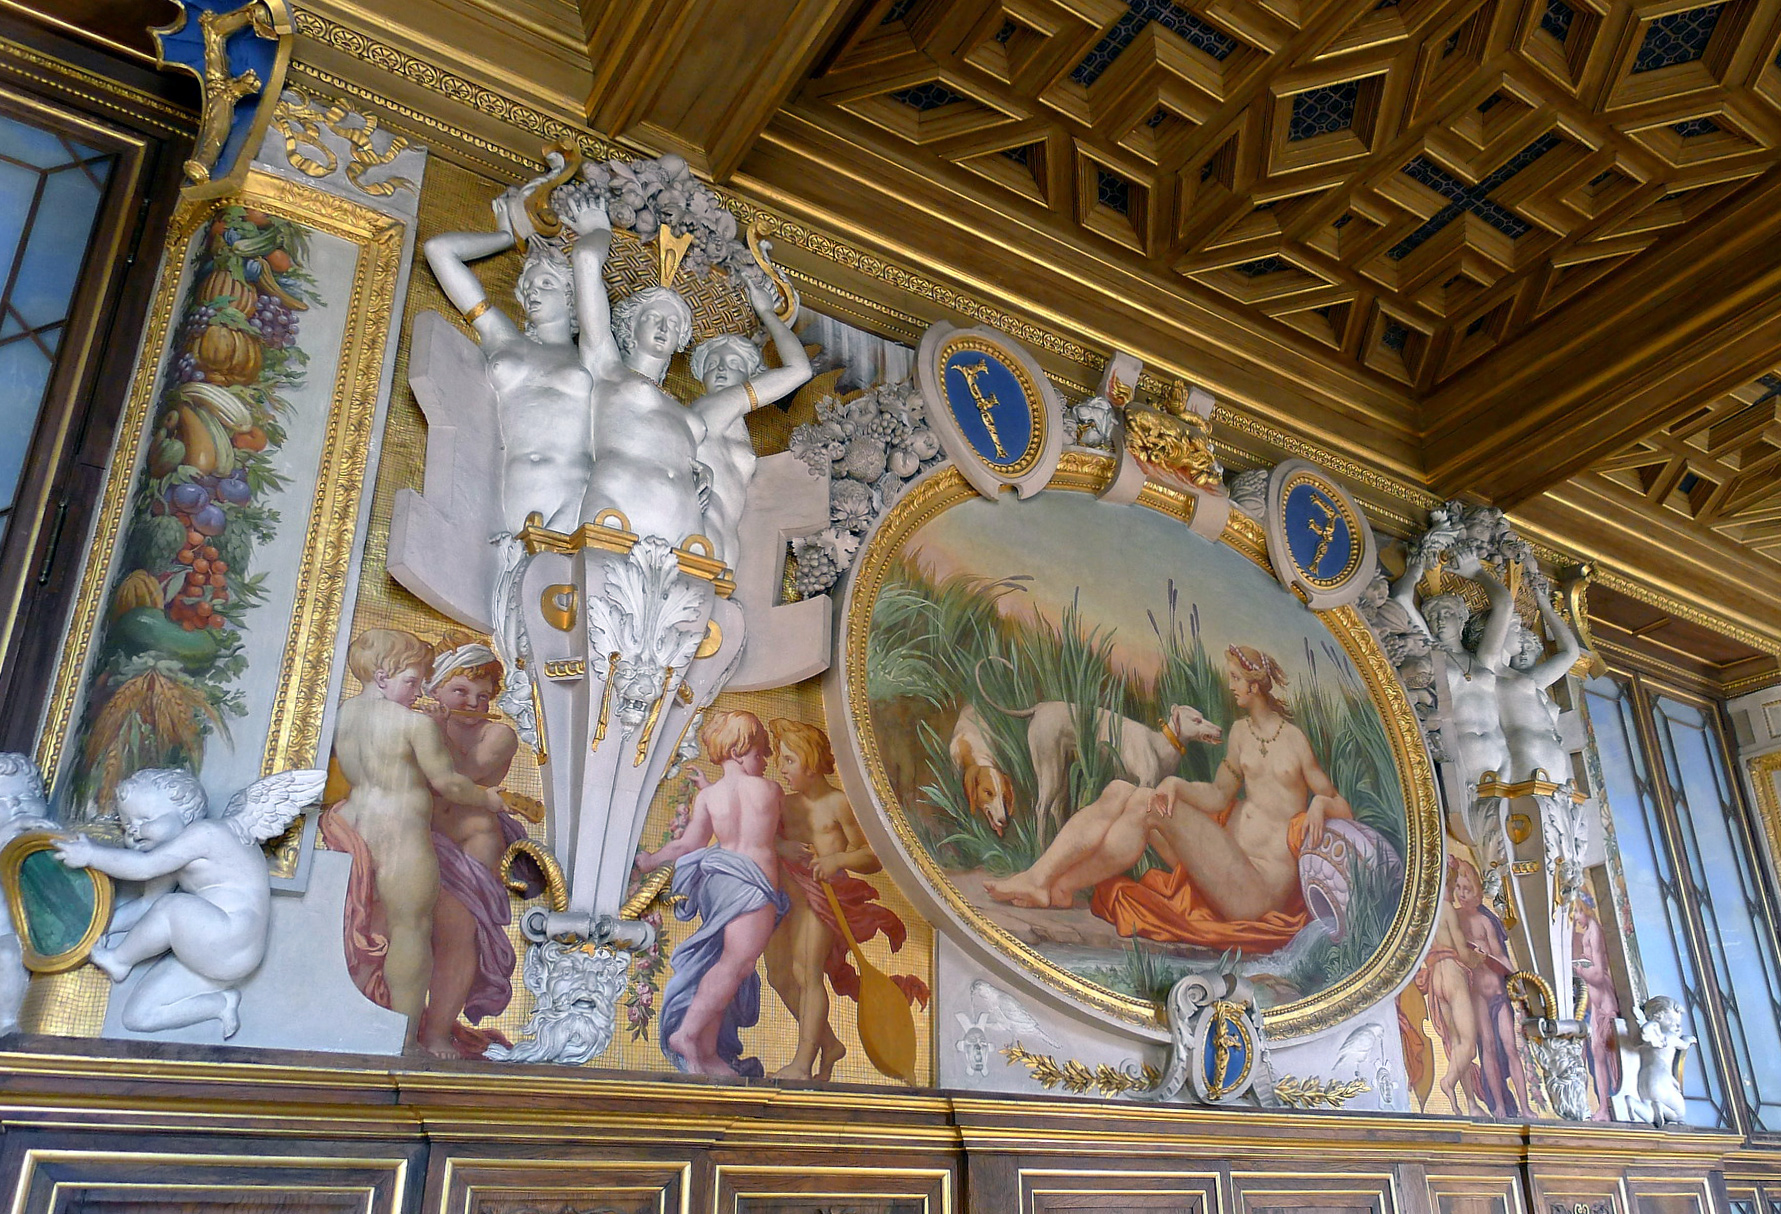 Workshop of Rosso Fiorentino, Gallery of Francis I, Château de Fontainebleau, 1528-1540 (photo:Corinne Moncelli, CC BY-NC-ND 2.0)